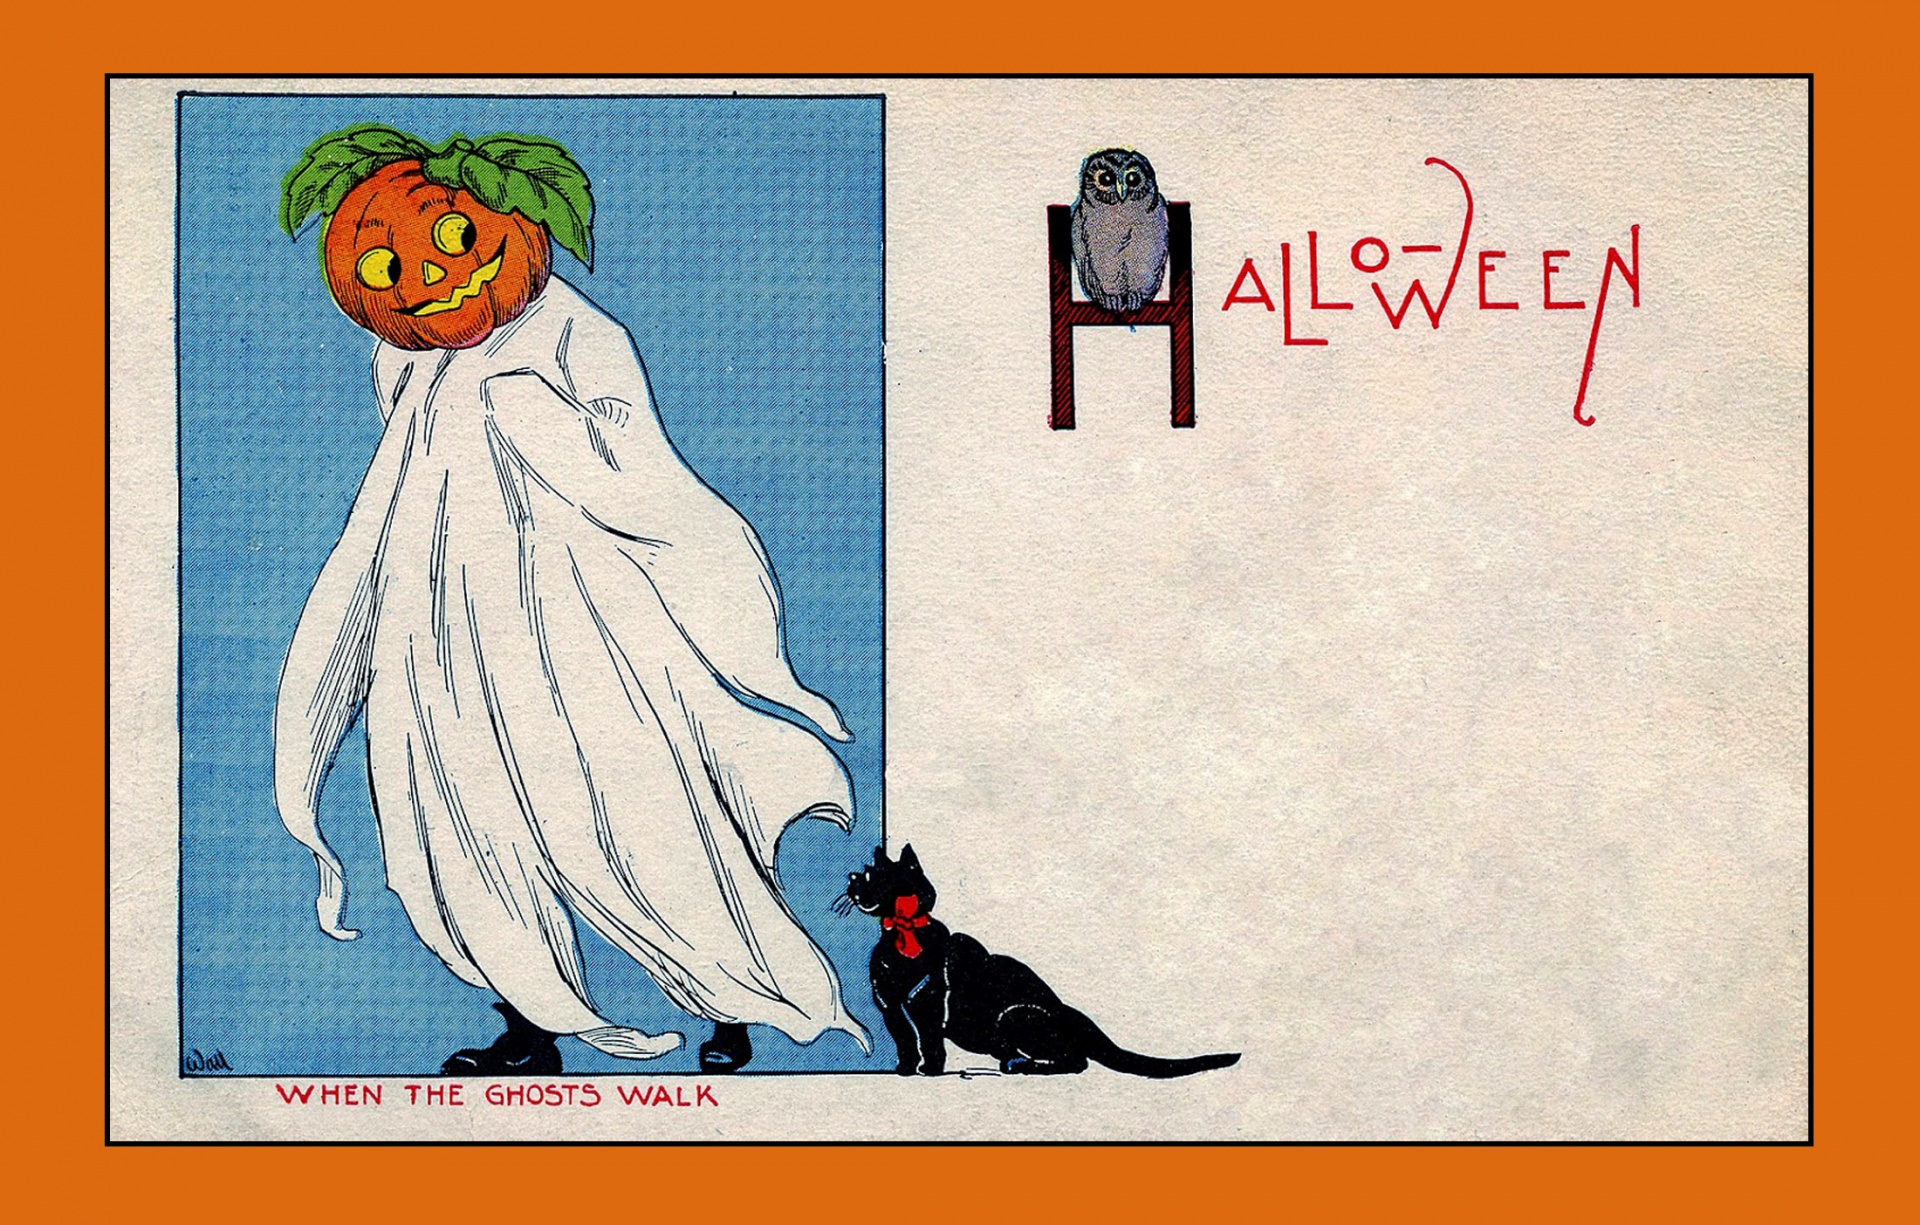 Vintage Halloween card or invitation template with cartoon ghost pumpkin, owl and black cat